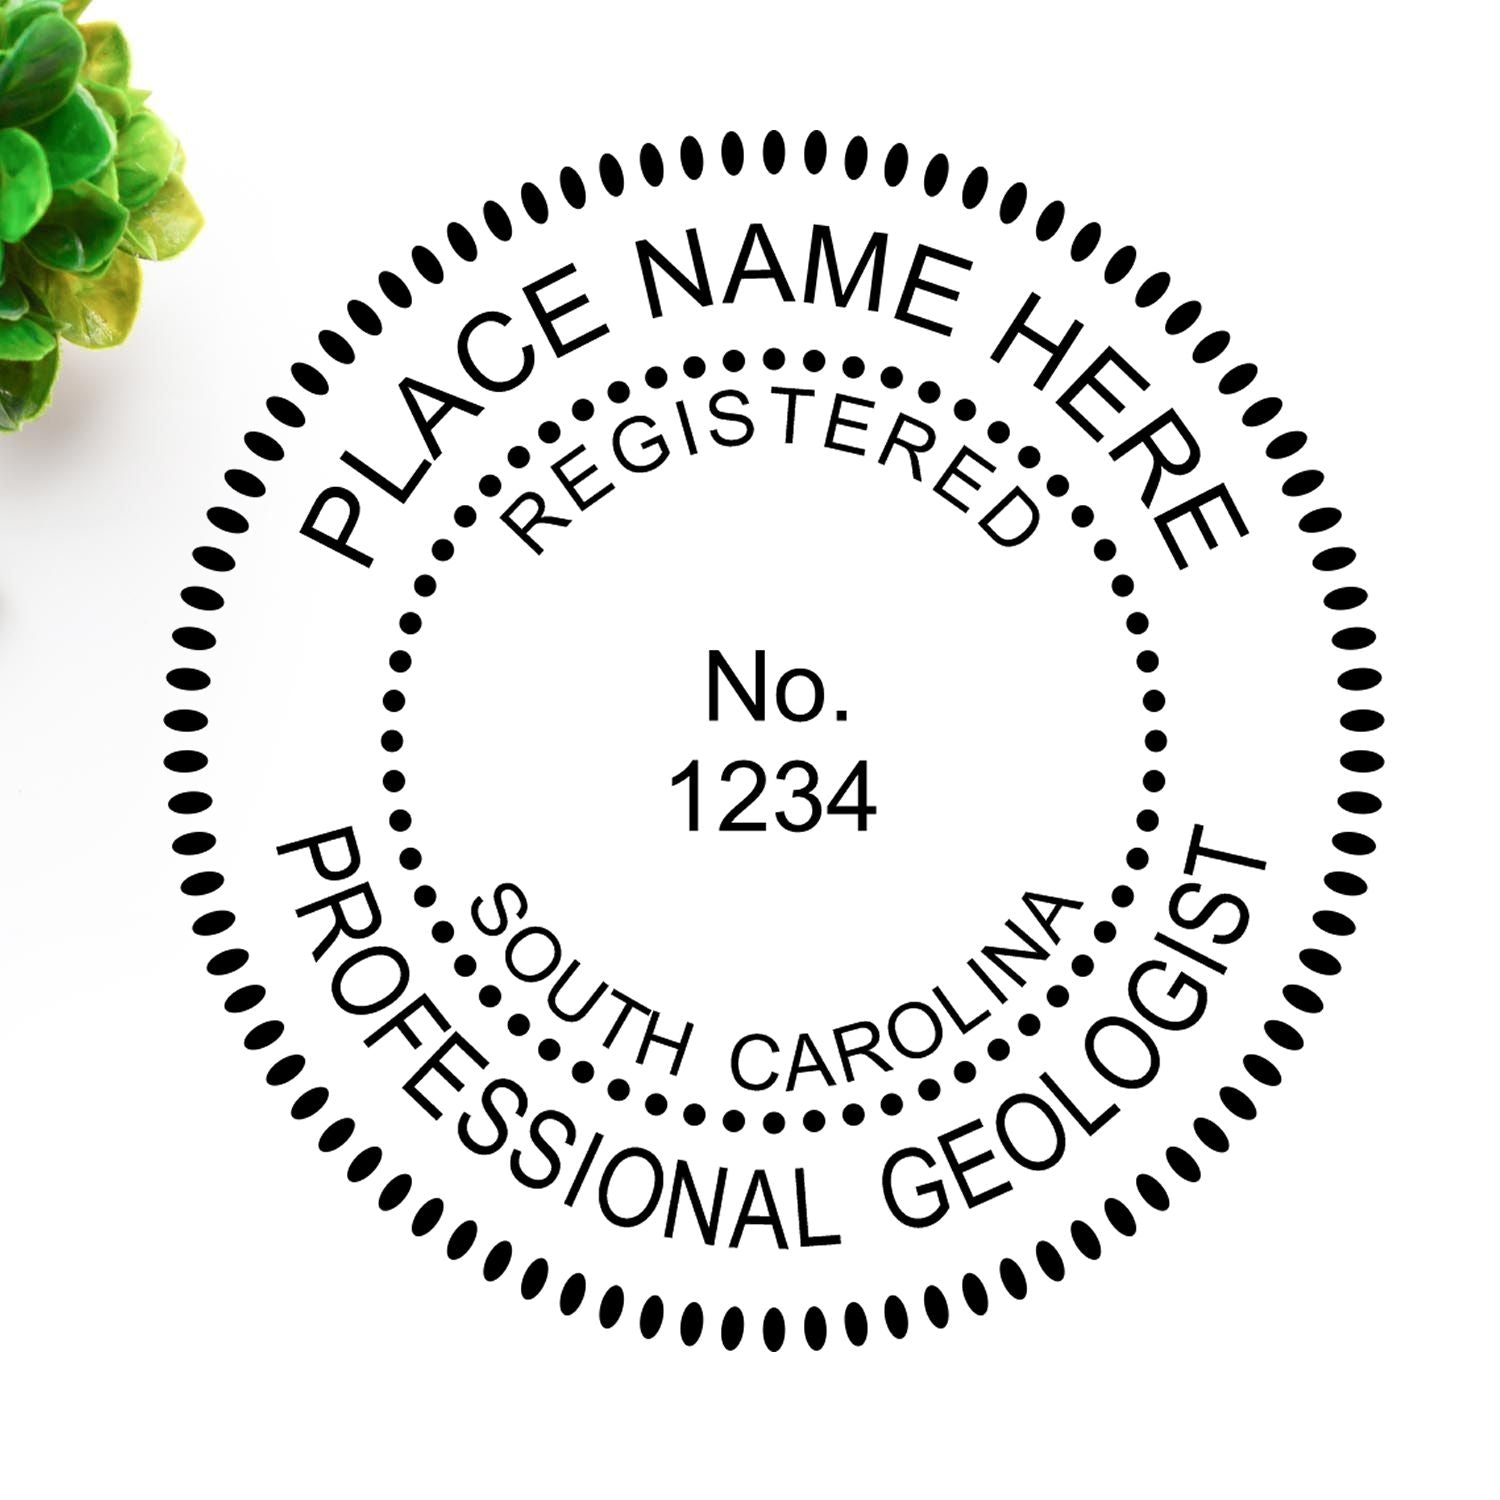 The main image for the Slim Pre-Inked South Carolina Professional Geologist Seal Stamp depicting a sample of the imprint and imprint sample